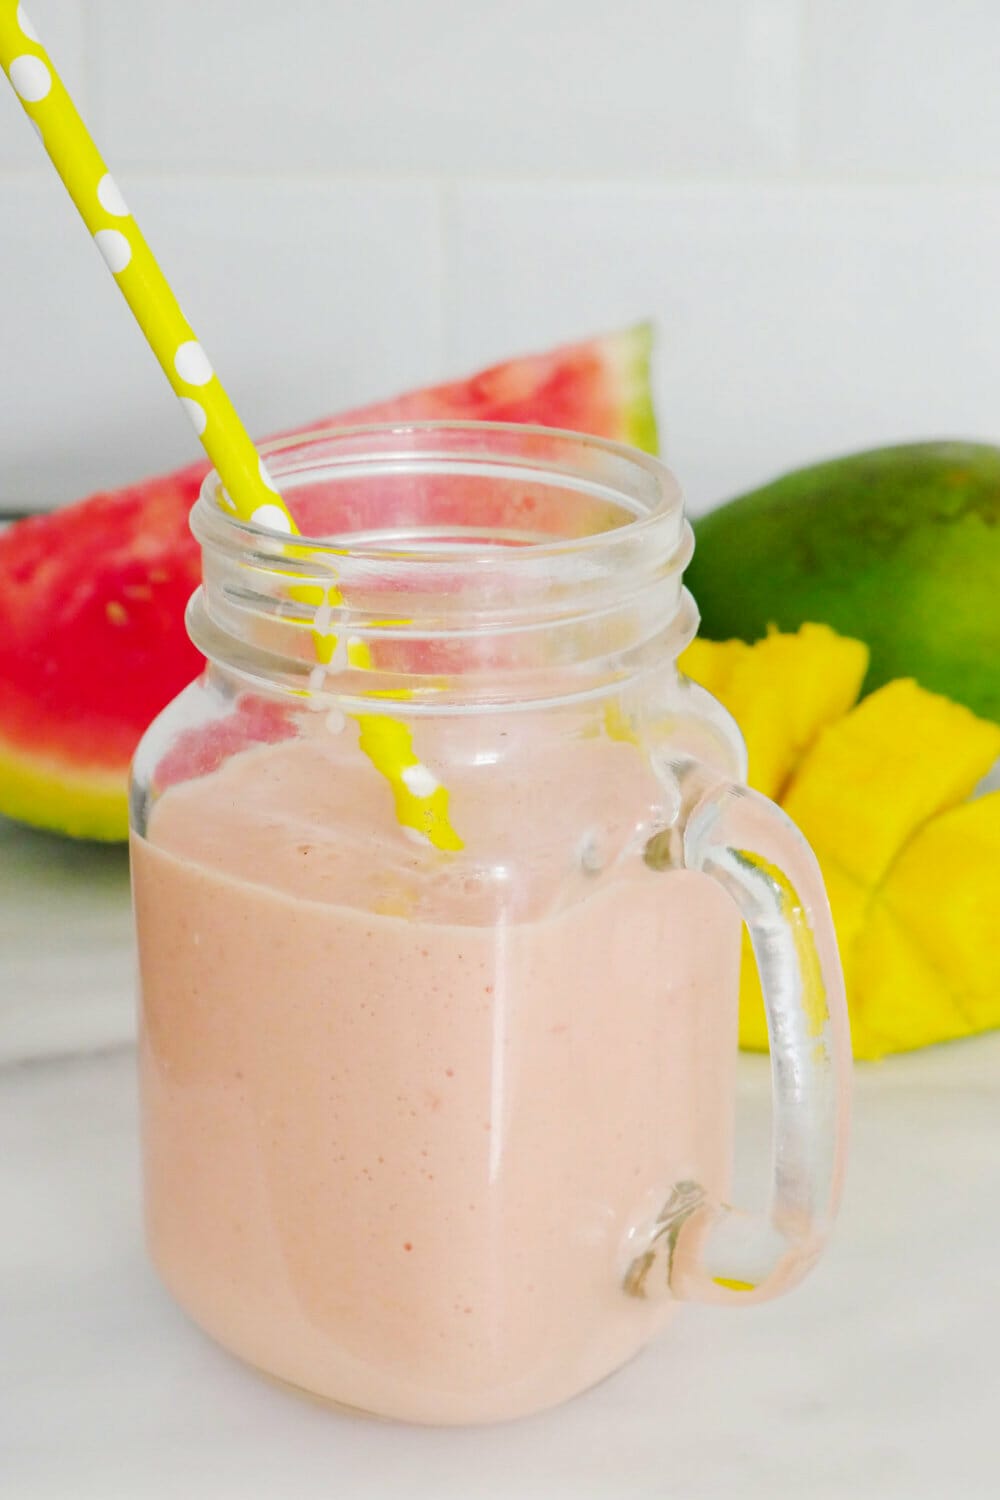 https://cdn.thesmoothiesite.com/wp-content/uploads/2021/01/Healthy-mango-watermelon-smoothie-for-weight-loss.jpg?lossy=1&fit=683%2C1024&ssl=1